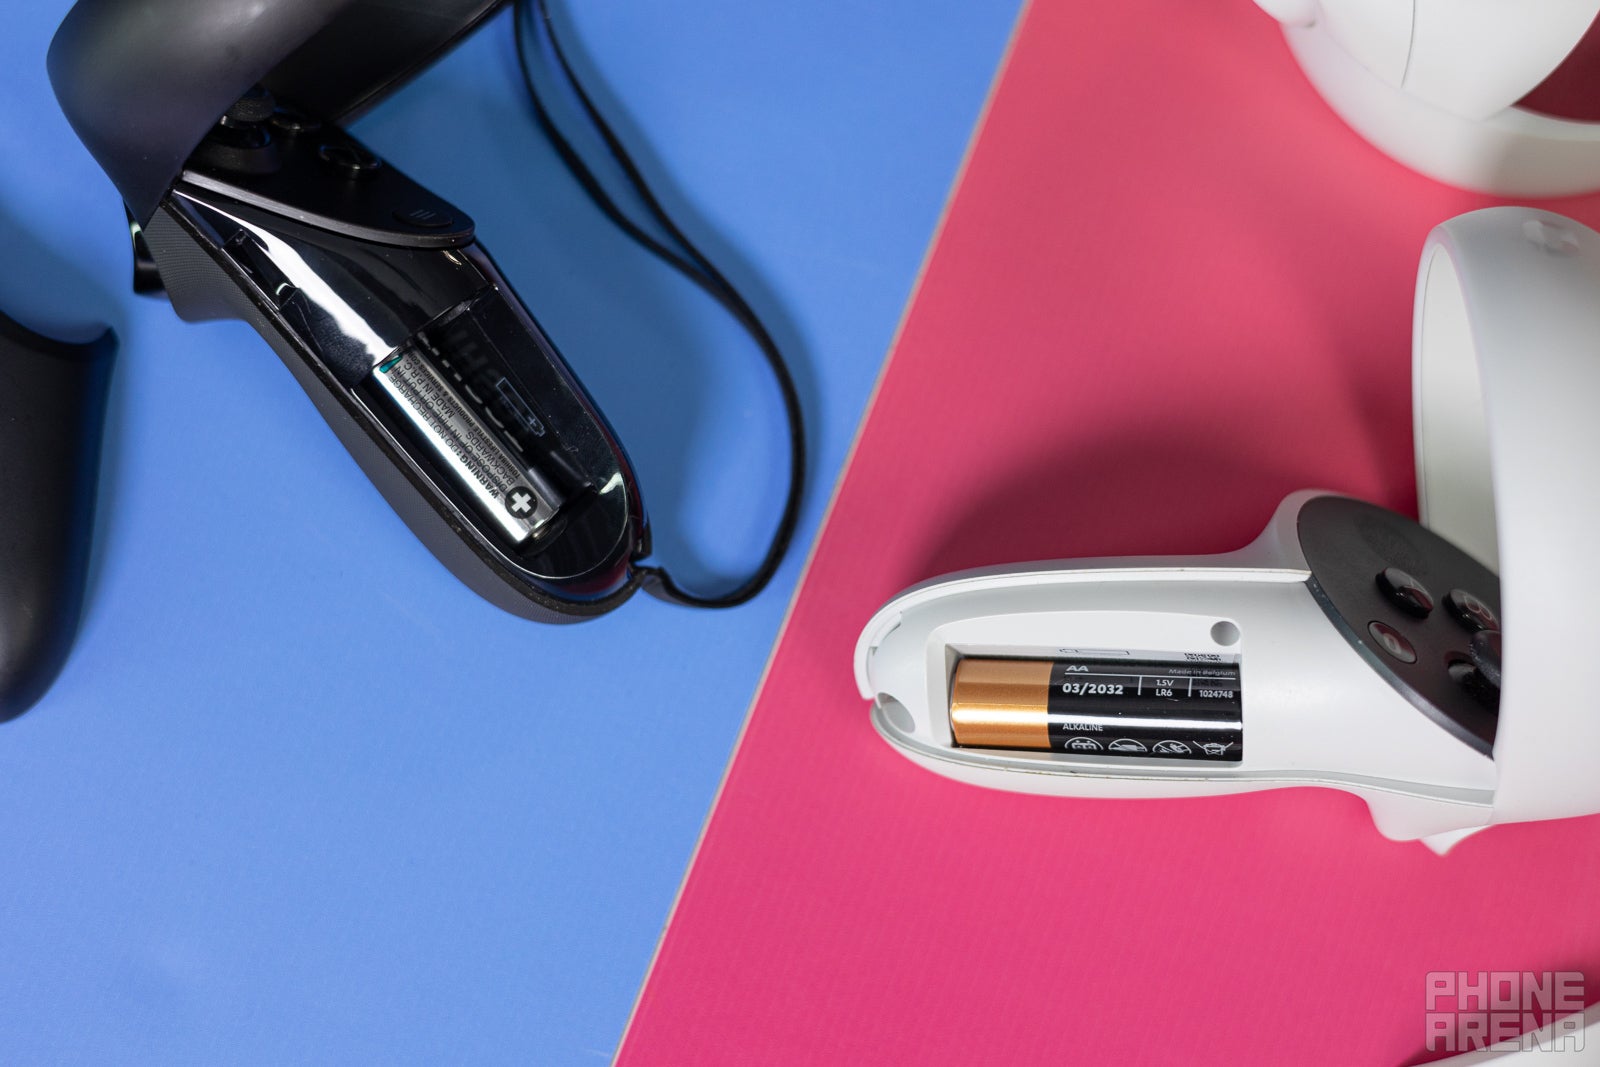 (Image Credit - PhoneArena) Both use replaceable AA batteries - Meta Quest 2 vs Oculus Rift S: Which one should you buy? The standalone VR headset or the PCVR-only